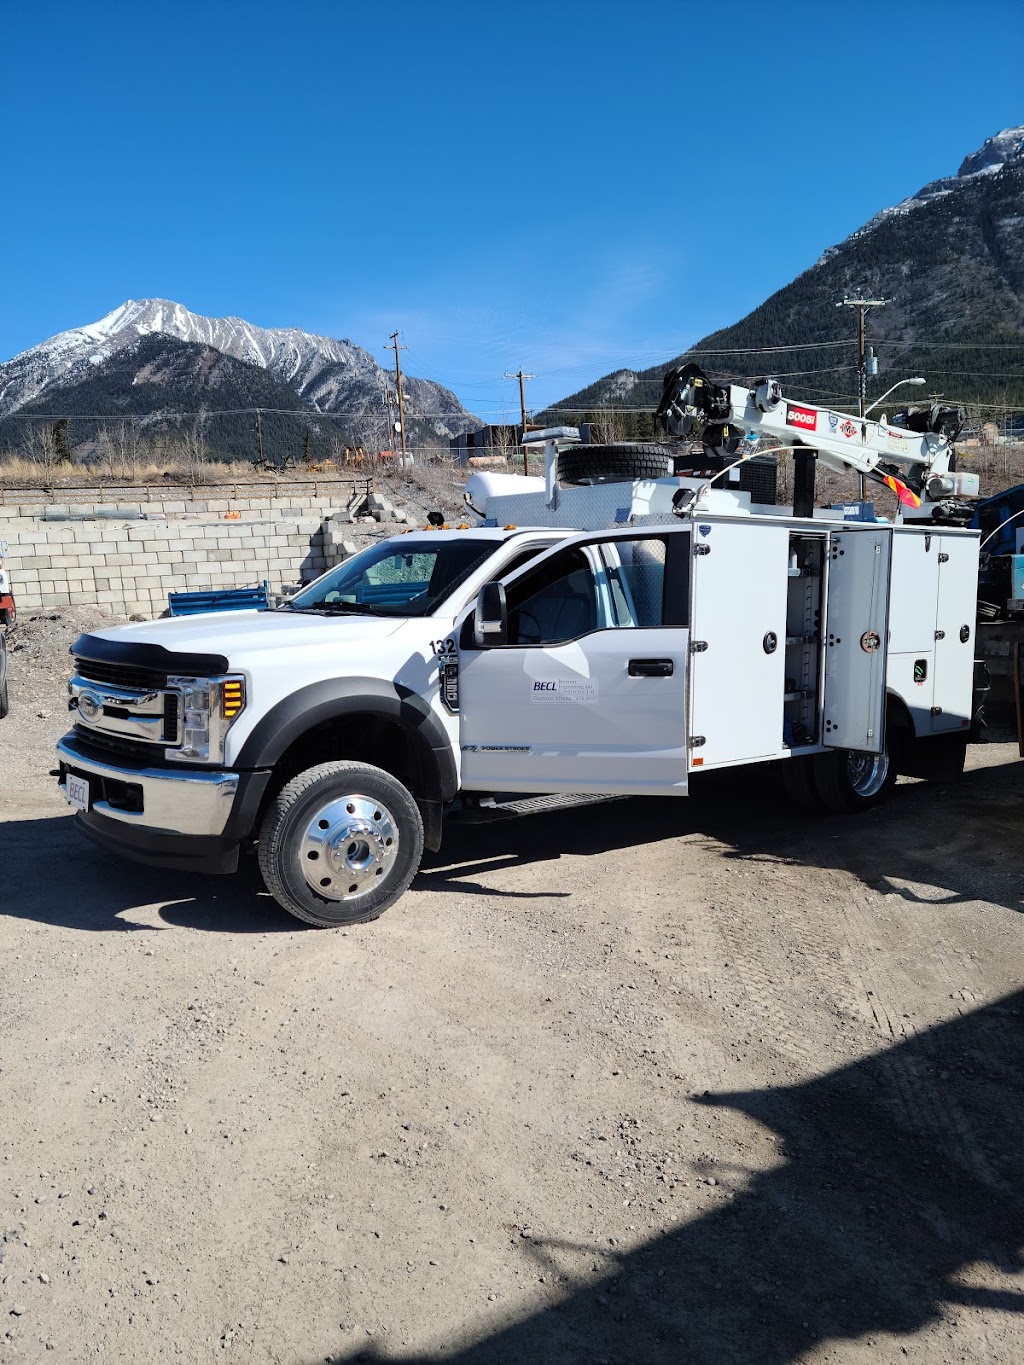 Bremner Engineering & Construction Ltd | 116 Boulder Crescent, Canmore, AB T1W 1L3, Canada | Phone: (403) 678-2659